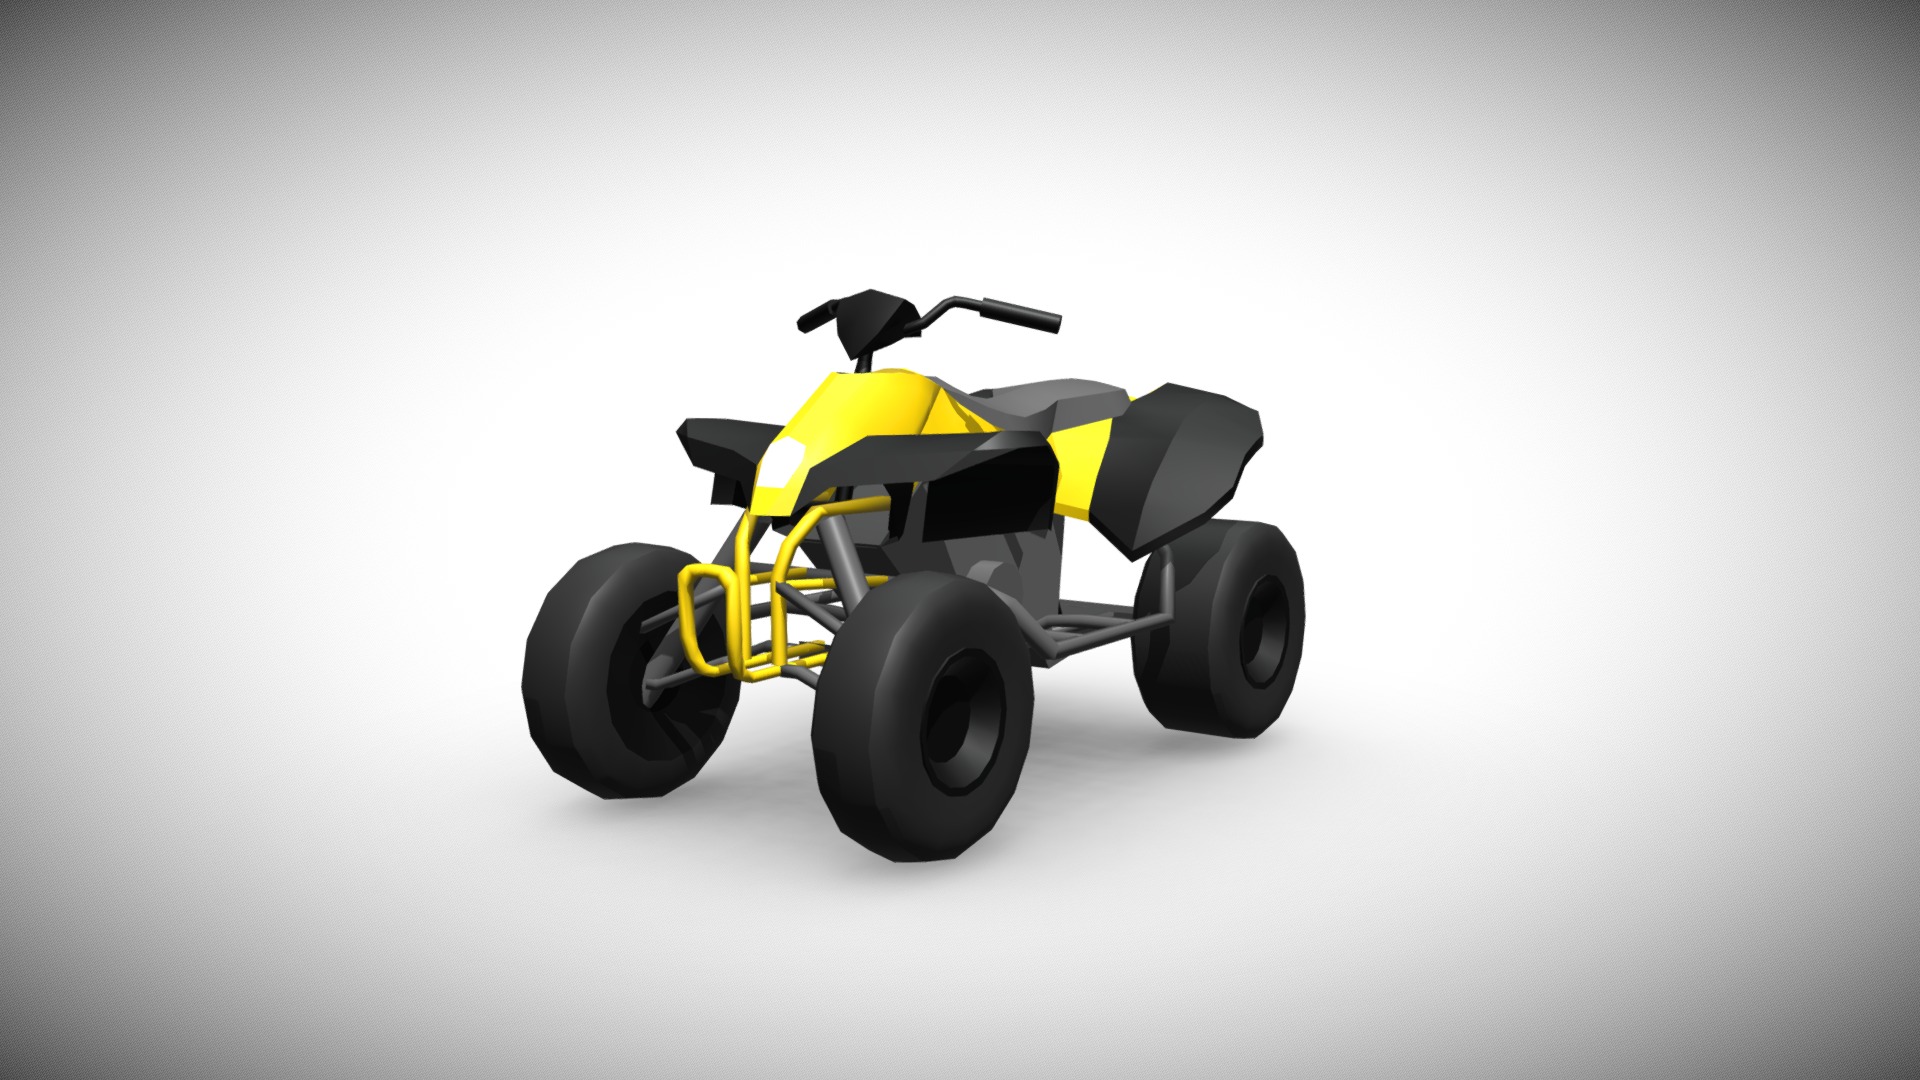 3D model Low-Poly ATV - This is a 3D model of the Low-Poly ATV. The 3D model is about a toy car on a white background.